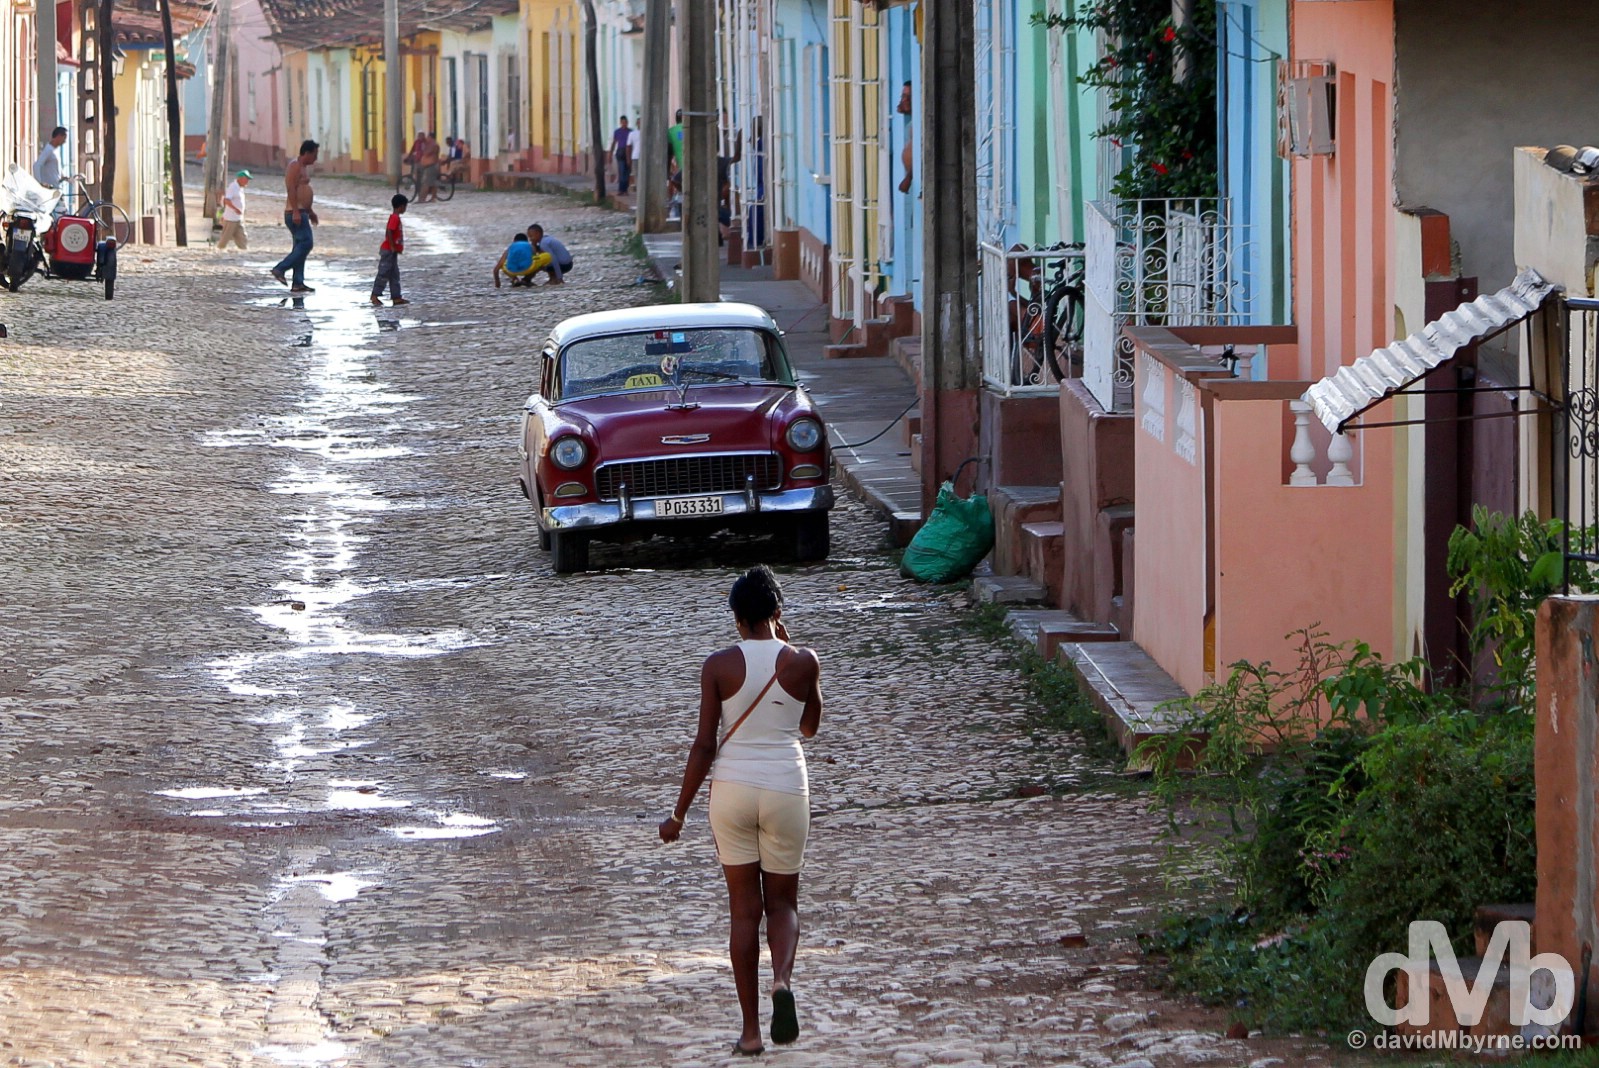 On the cobbled streets of Trinidad, Cuba. May 5, 2015.